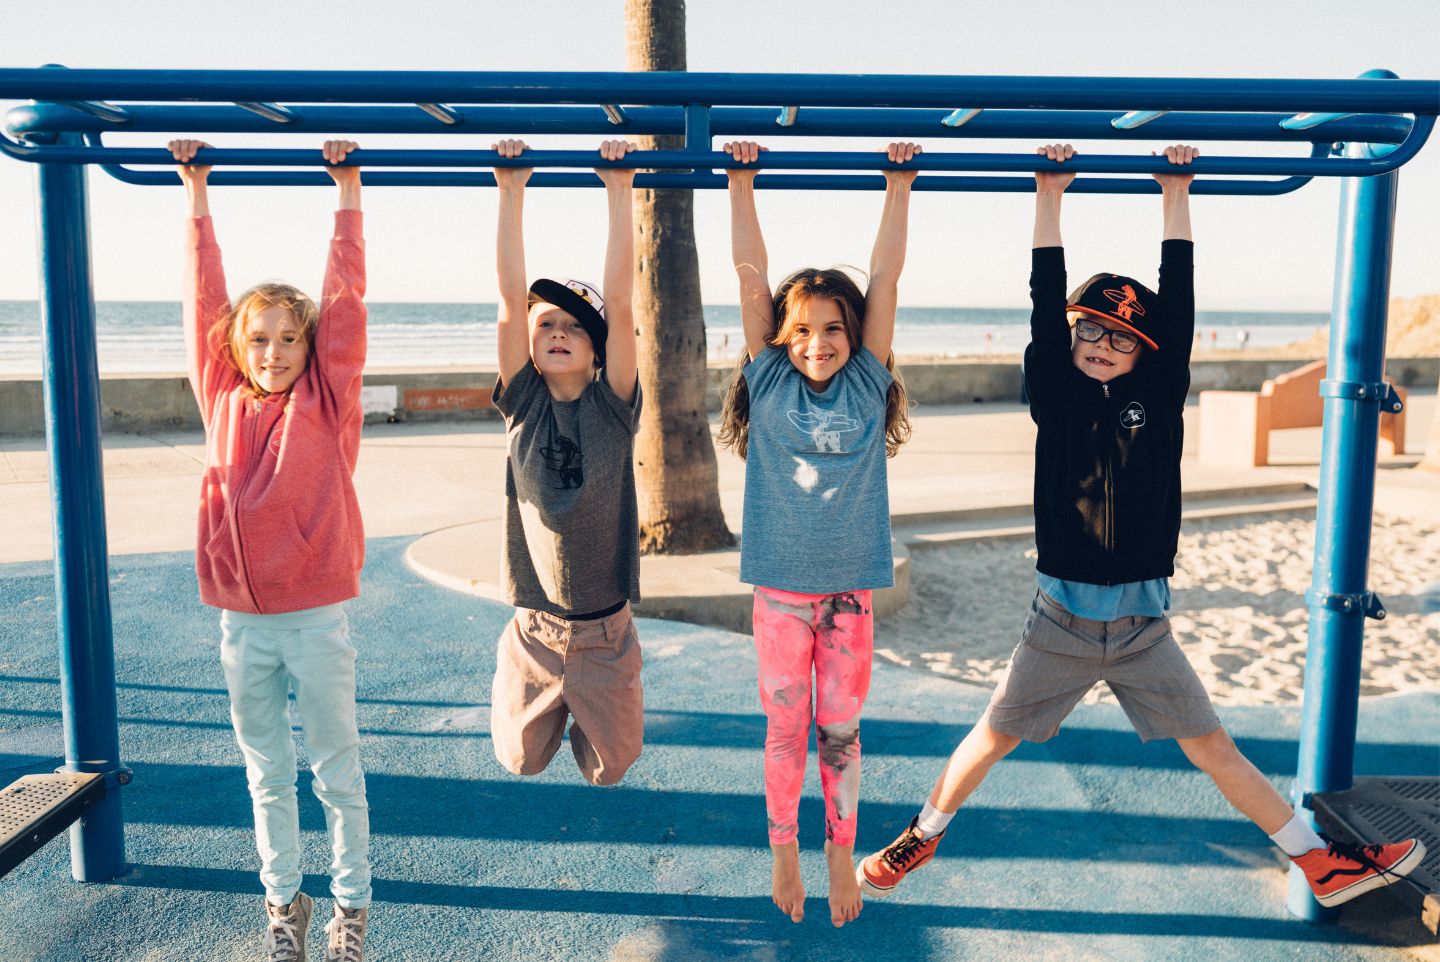 Multiple kids hanging from the monkey bars on the beach two girls and two boys wearing everyday California clothes